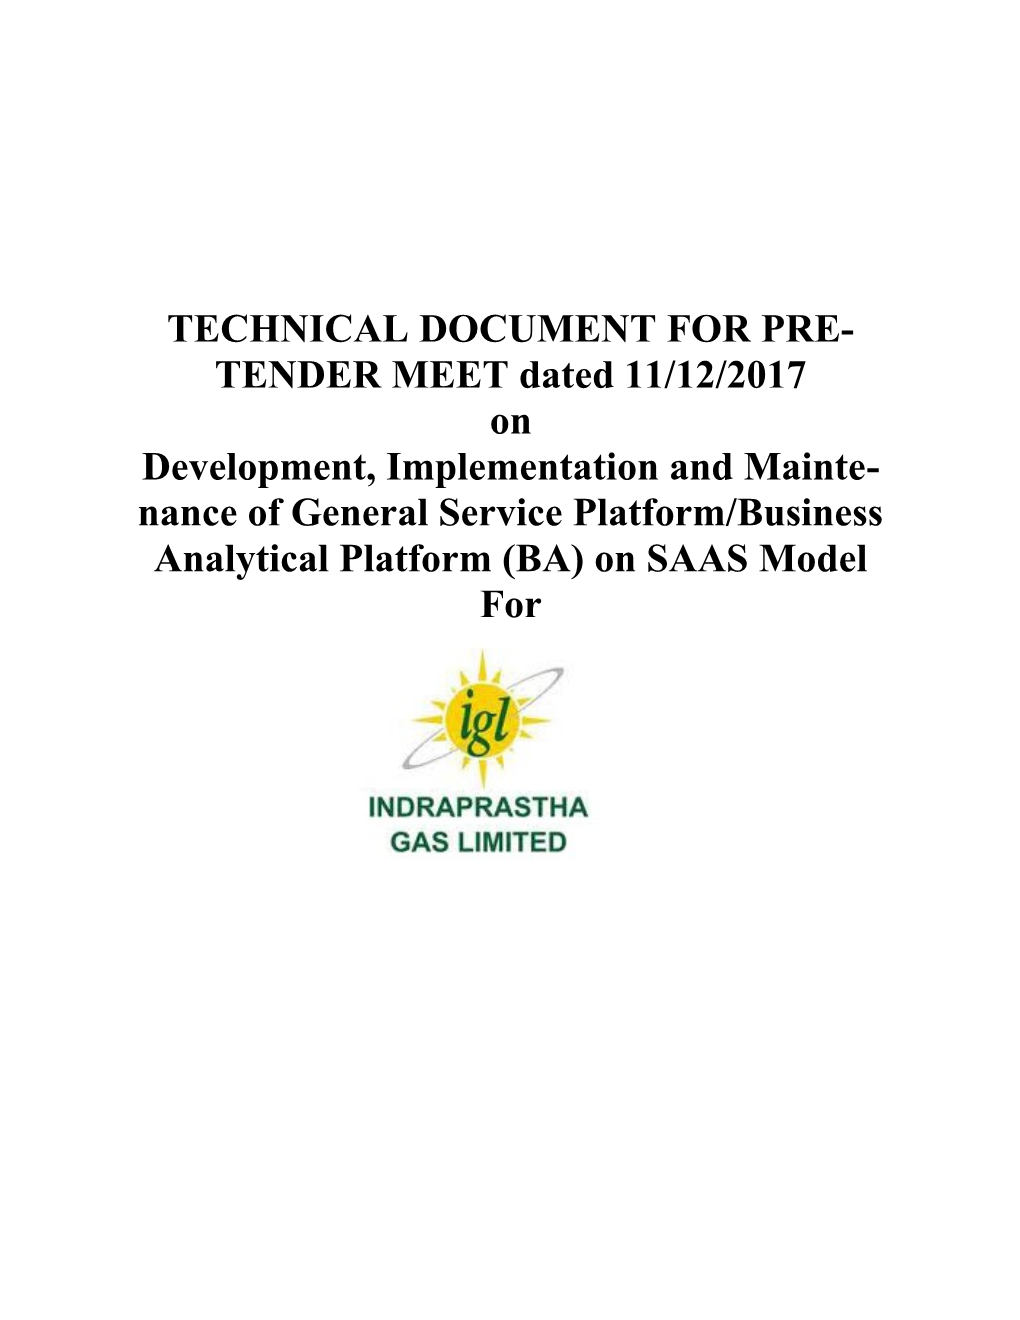 TECHNICAL DOCUMENT for PRE-TENDER MEET Dated 11/12/2017